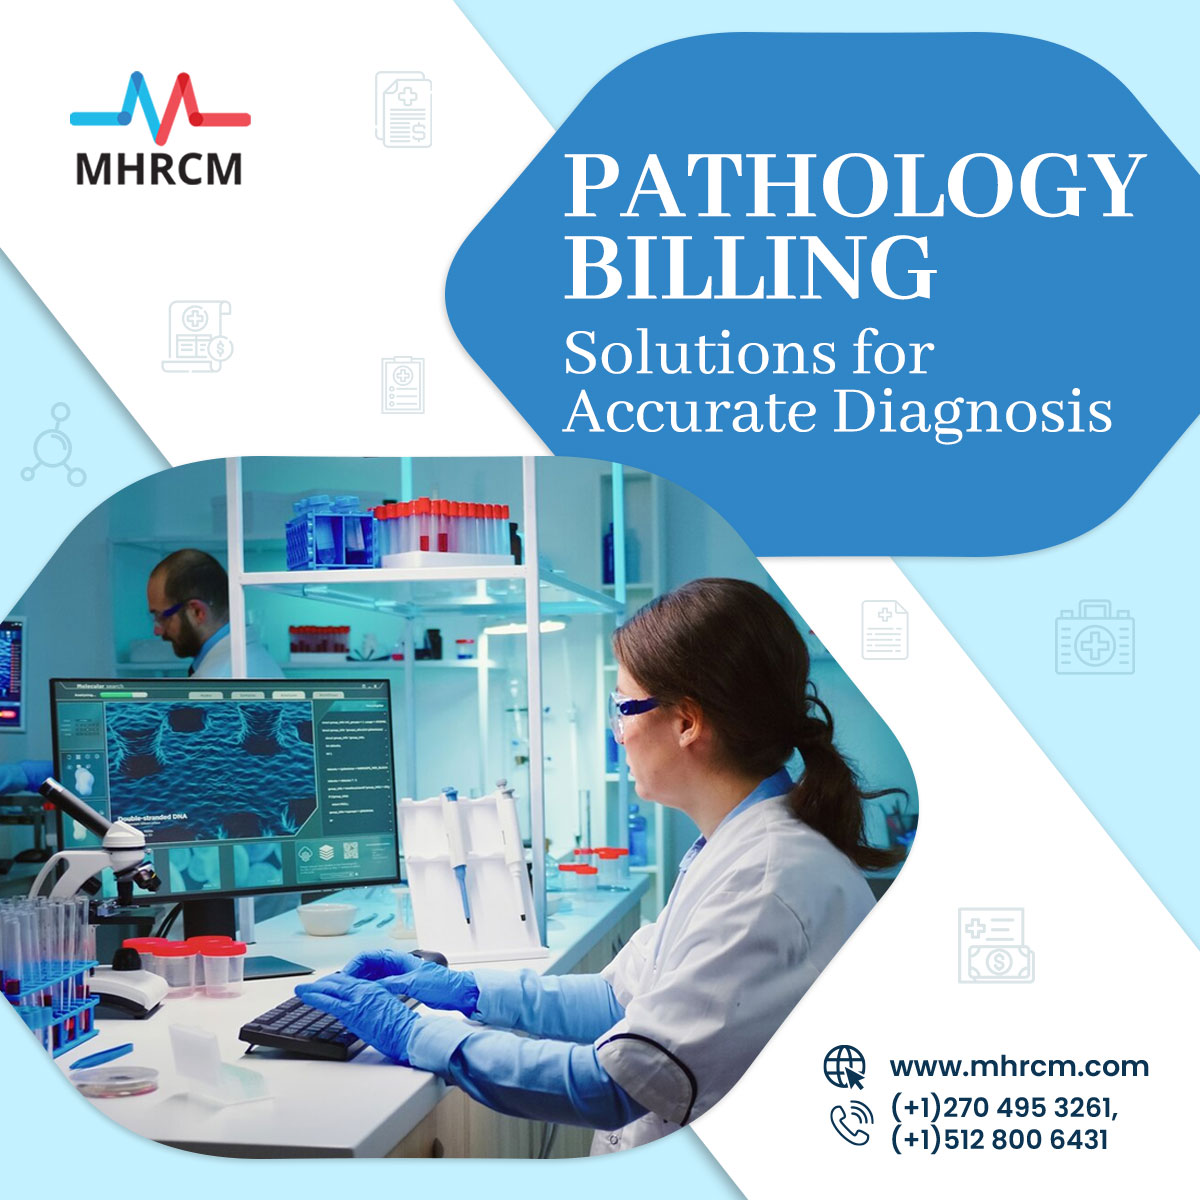 Our team includes Pathology Specialists who have a deep understanding of Pathology practices. We offer customized solutions for Pathological practices that allows to focus more on diagnosis and patient consultations.  #PathologyBilling | #PathologyPractices | #MHRCM